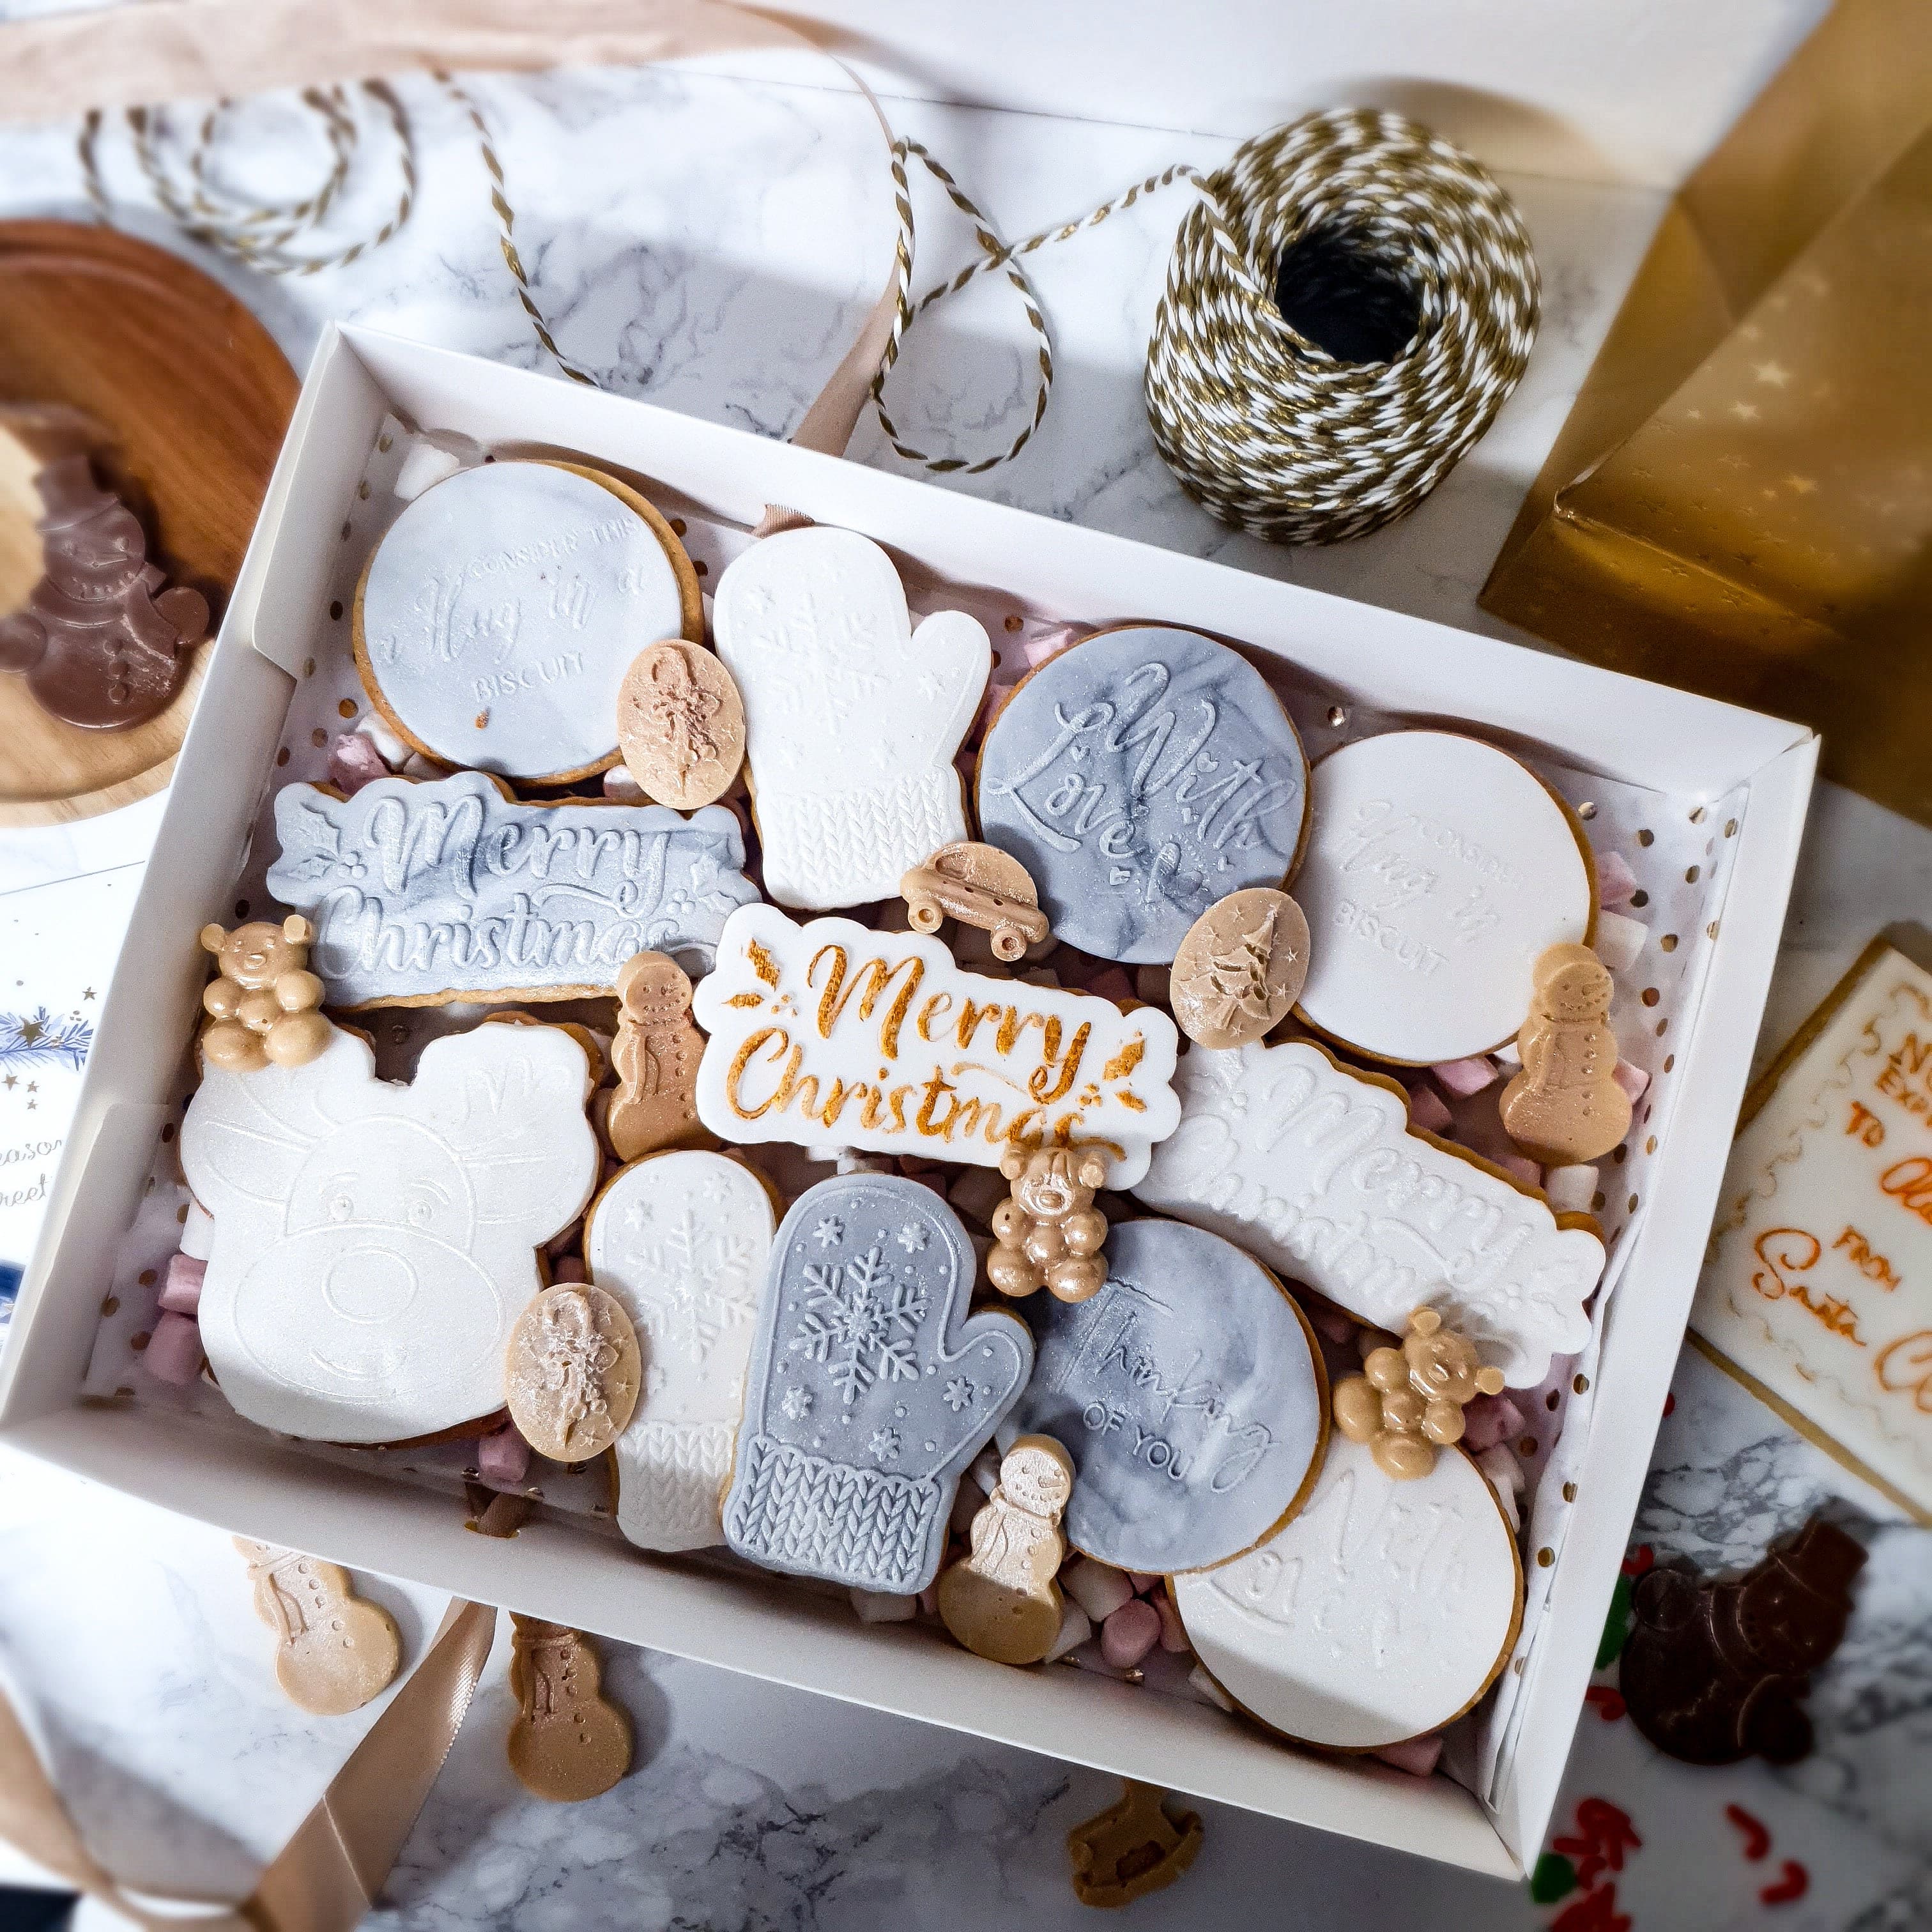 Personalised Christmas Cookie box with Belgian Chocolate figures - Sisi food sculptor